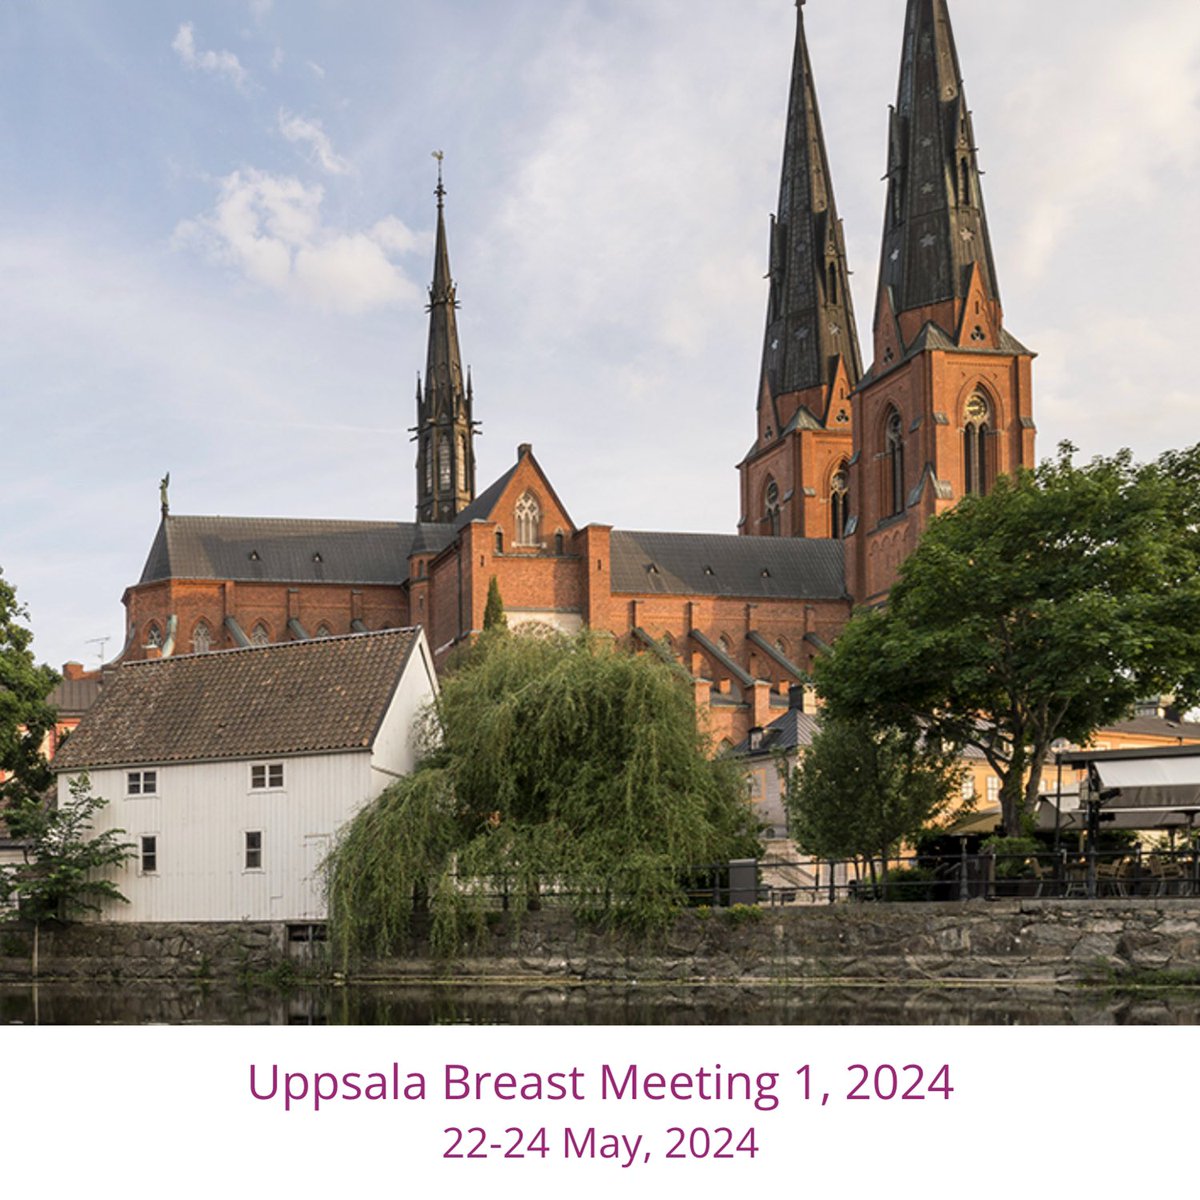 We are happy to welcome you at the #UppsalaBreastMeeting, between May 22-24. Hot topics and workshops and a diverse international faculty. More info: uppsalabreast.se Uppsala Breast Meeting 1, 2024 22-24 May, 2024 #GretaOncoplastic #NSLTV #NeverStopLearning